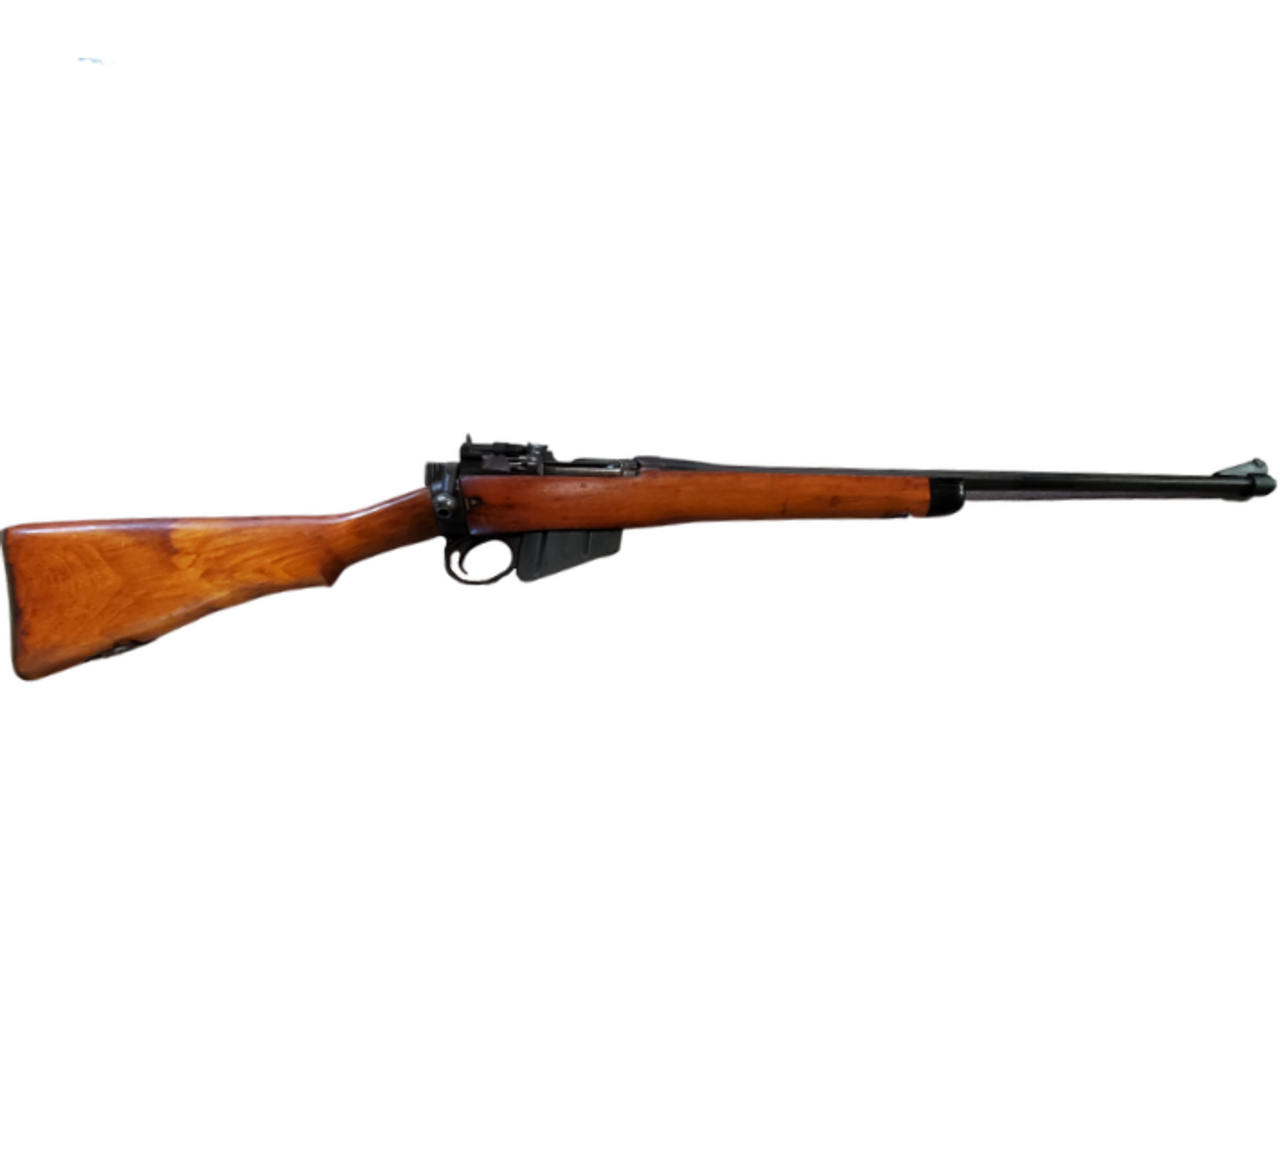 Used Lee Enfield No4 Mk1 Sporter Bolt-Action Rifle, 303 British, Blued,  Sporter Wood Stock, Iron Sights, Leather Sling, 1 Magazine, Good Condition.  Reliable Gun: Firearms, Ammunition & Outdoor Gear in Canada